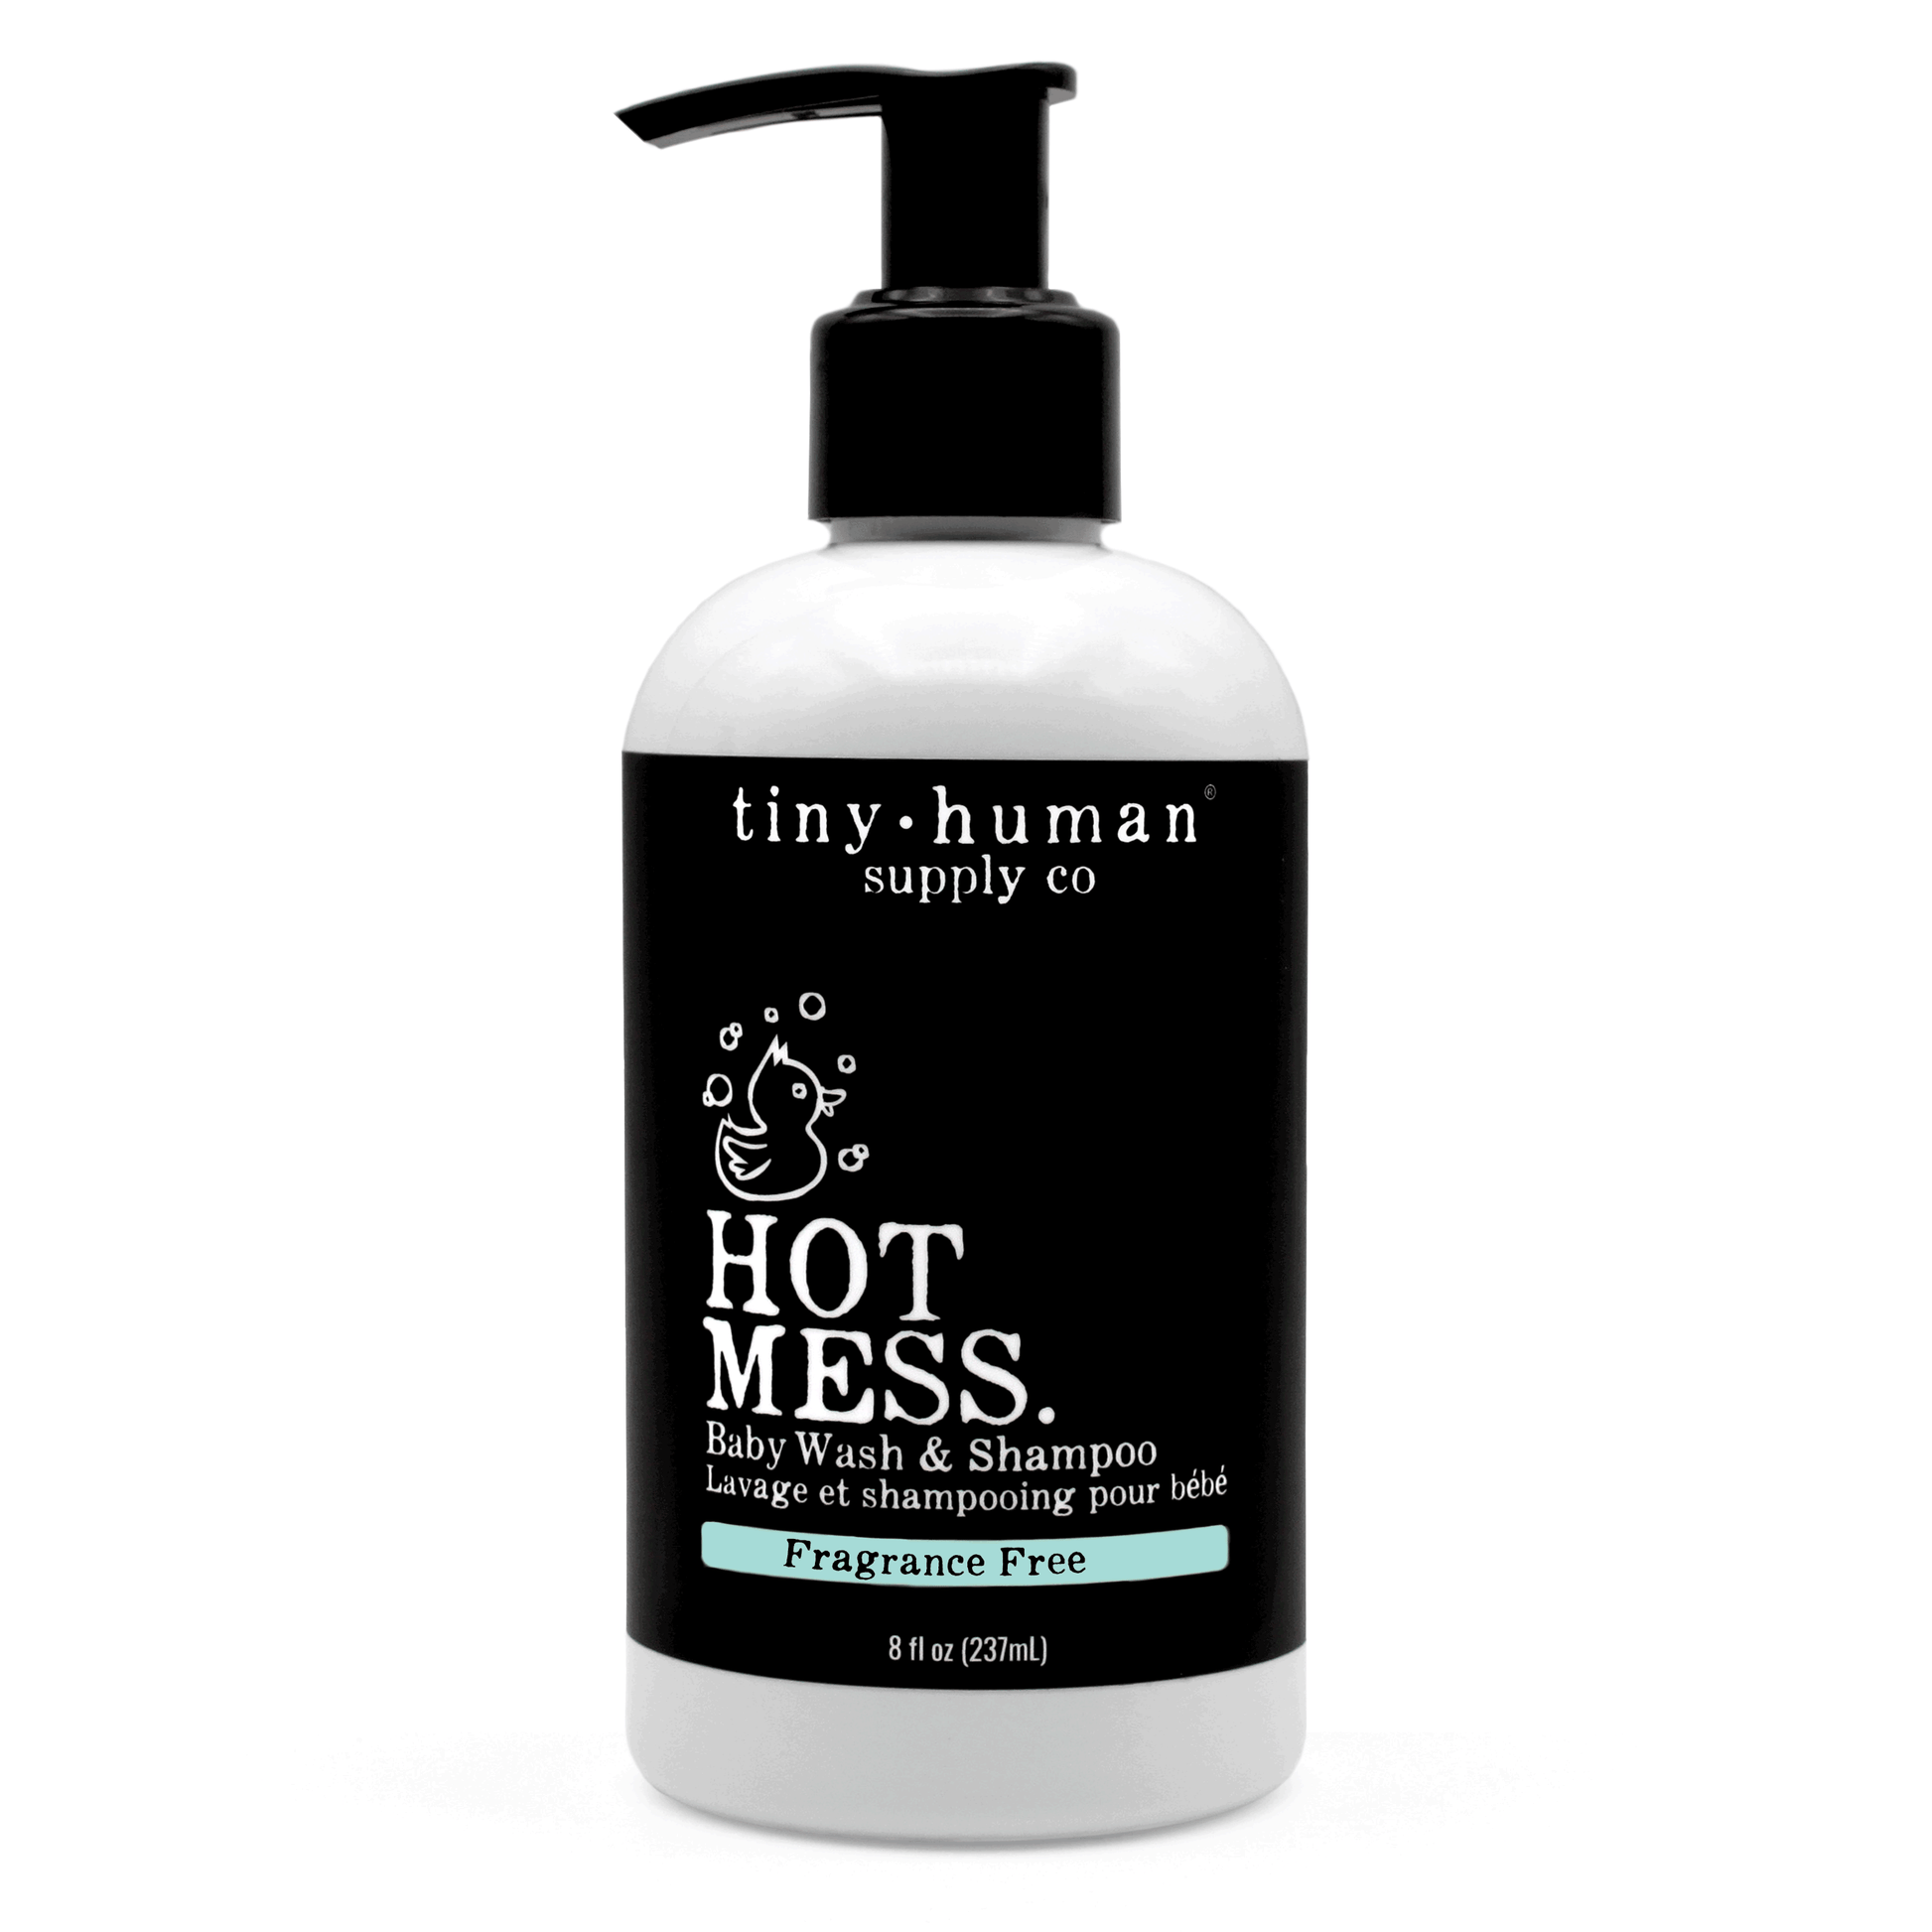 tiny human supply co hot mess baby wash and shampoo in classic baby scent